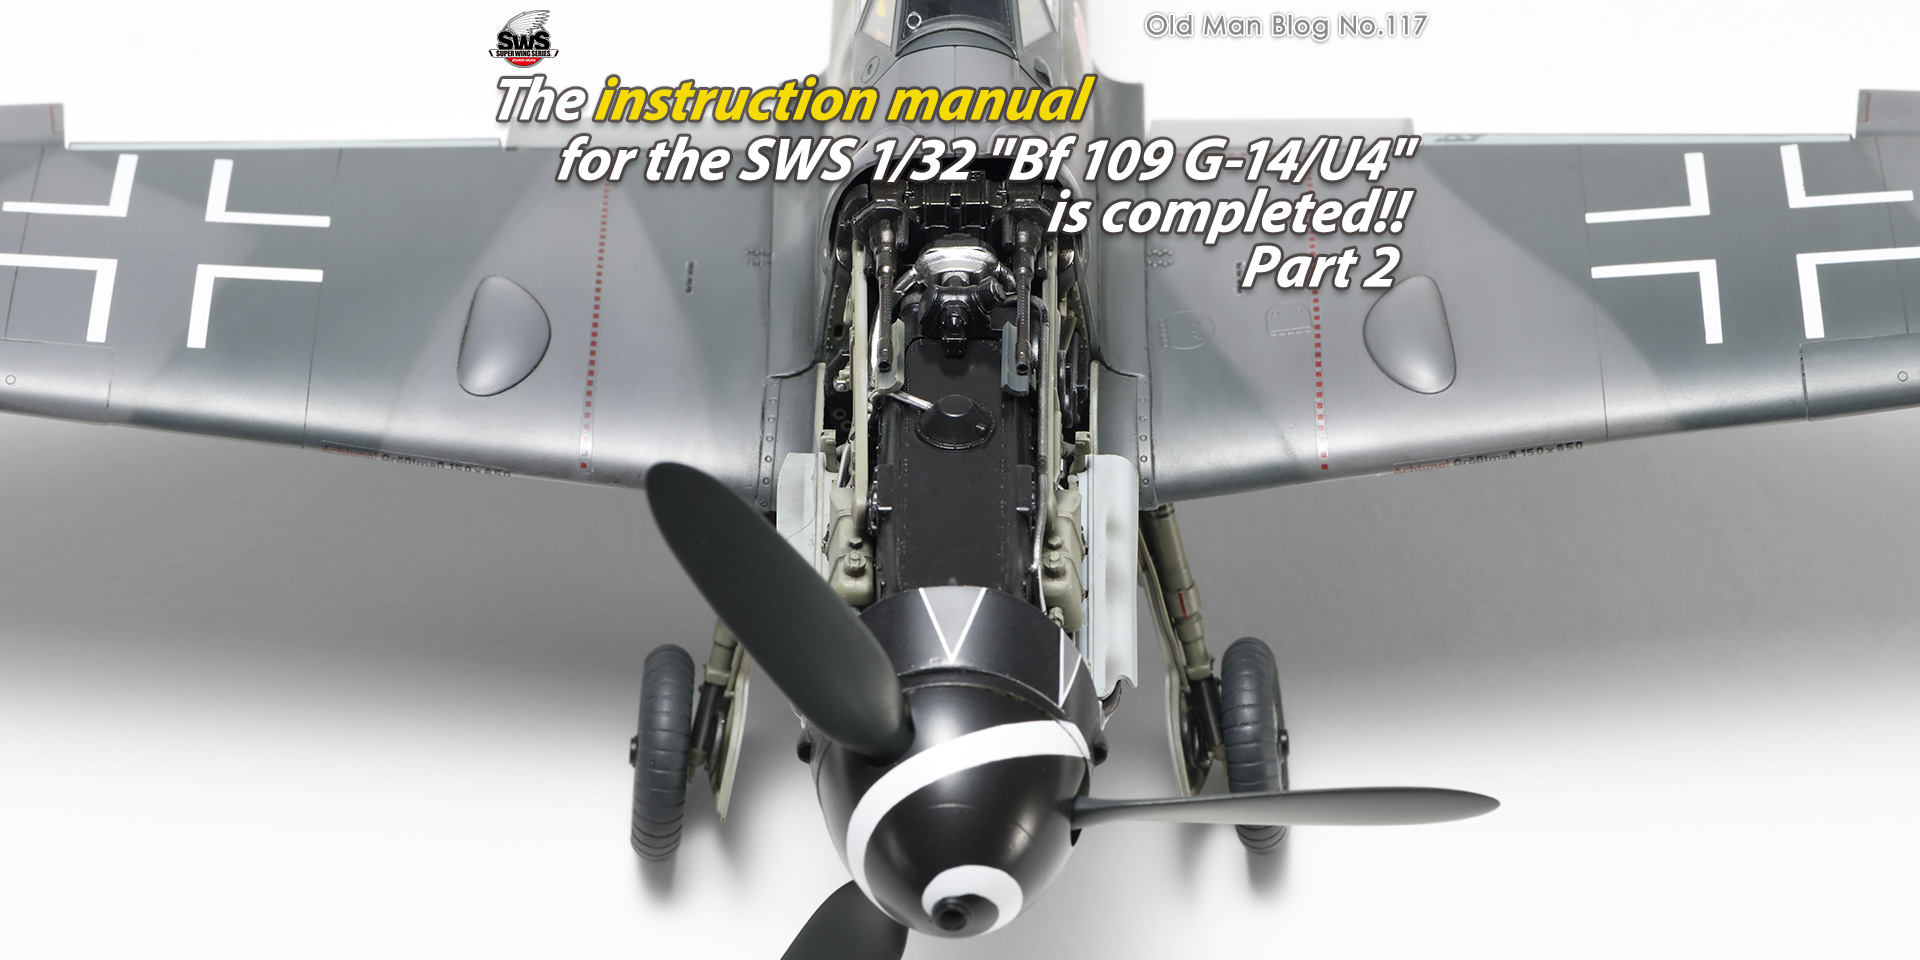 The instruction manual for the SWS 1/32 Bf 109 G-14/U14 is completed!! Part 2